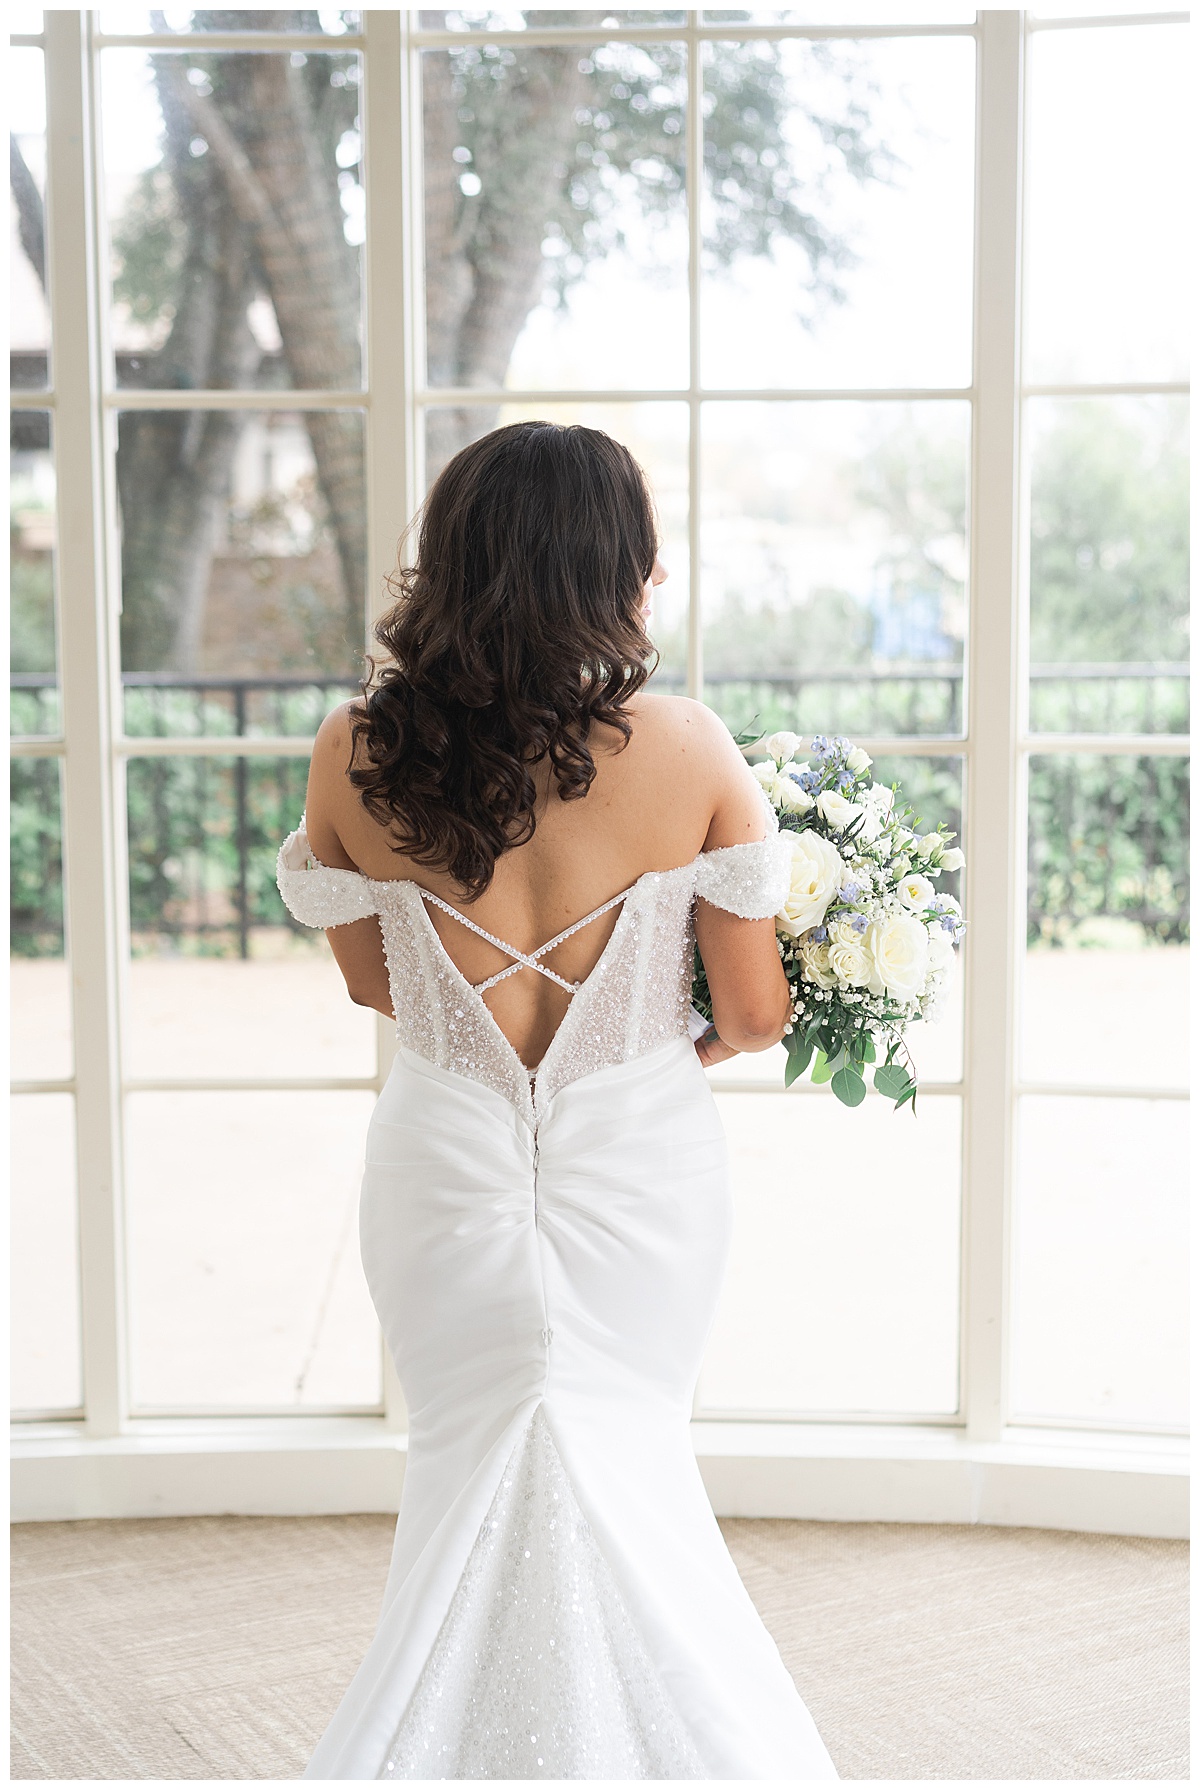 Bridal gown details for Houston’s Best Wedding Photographers